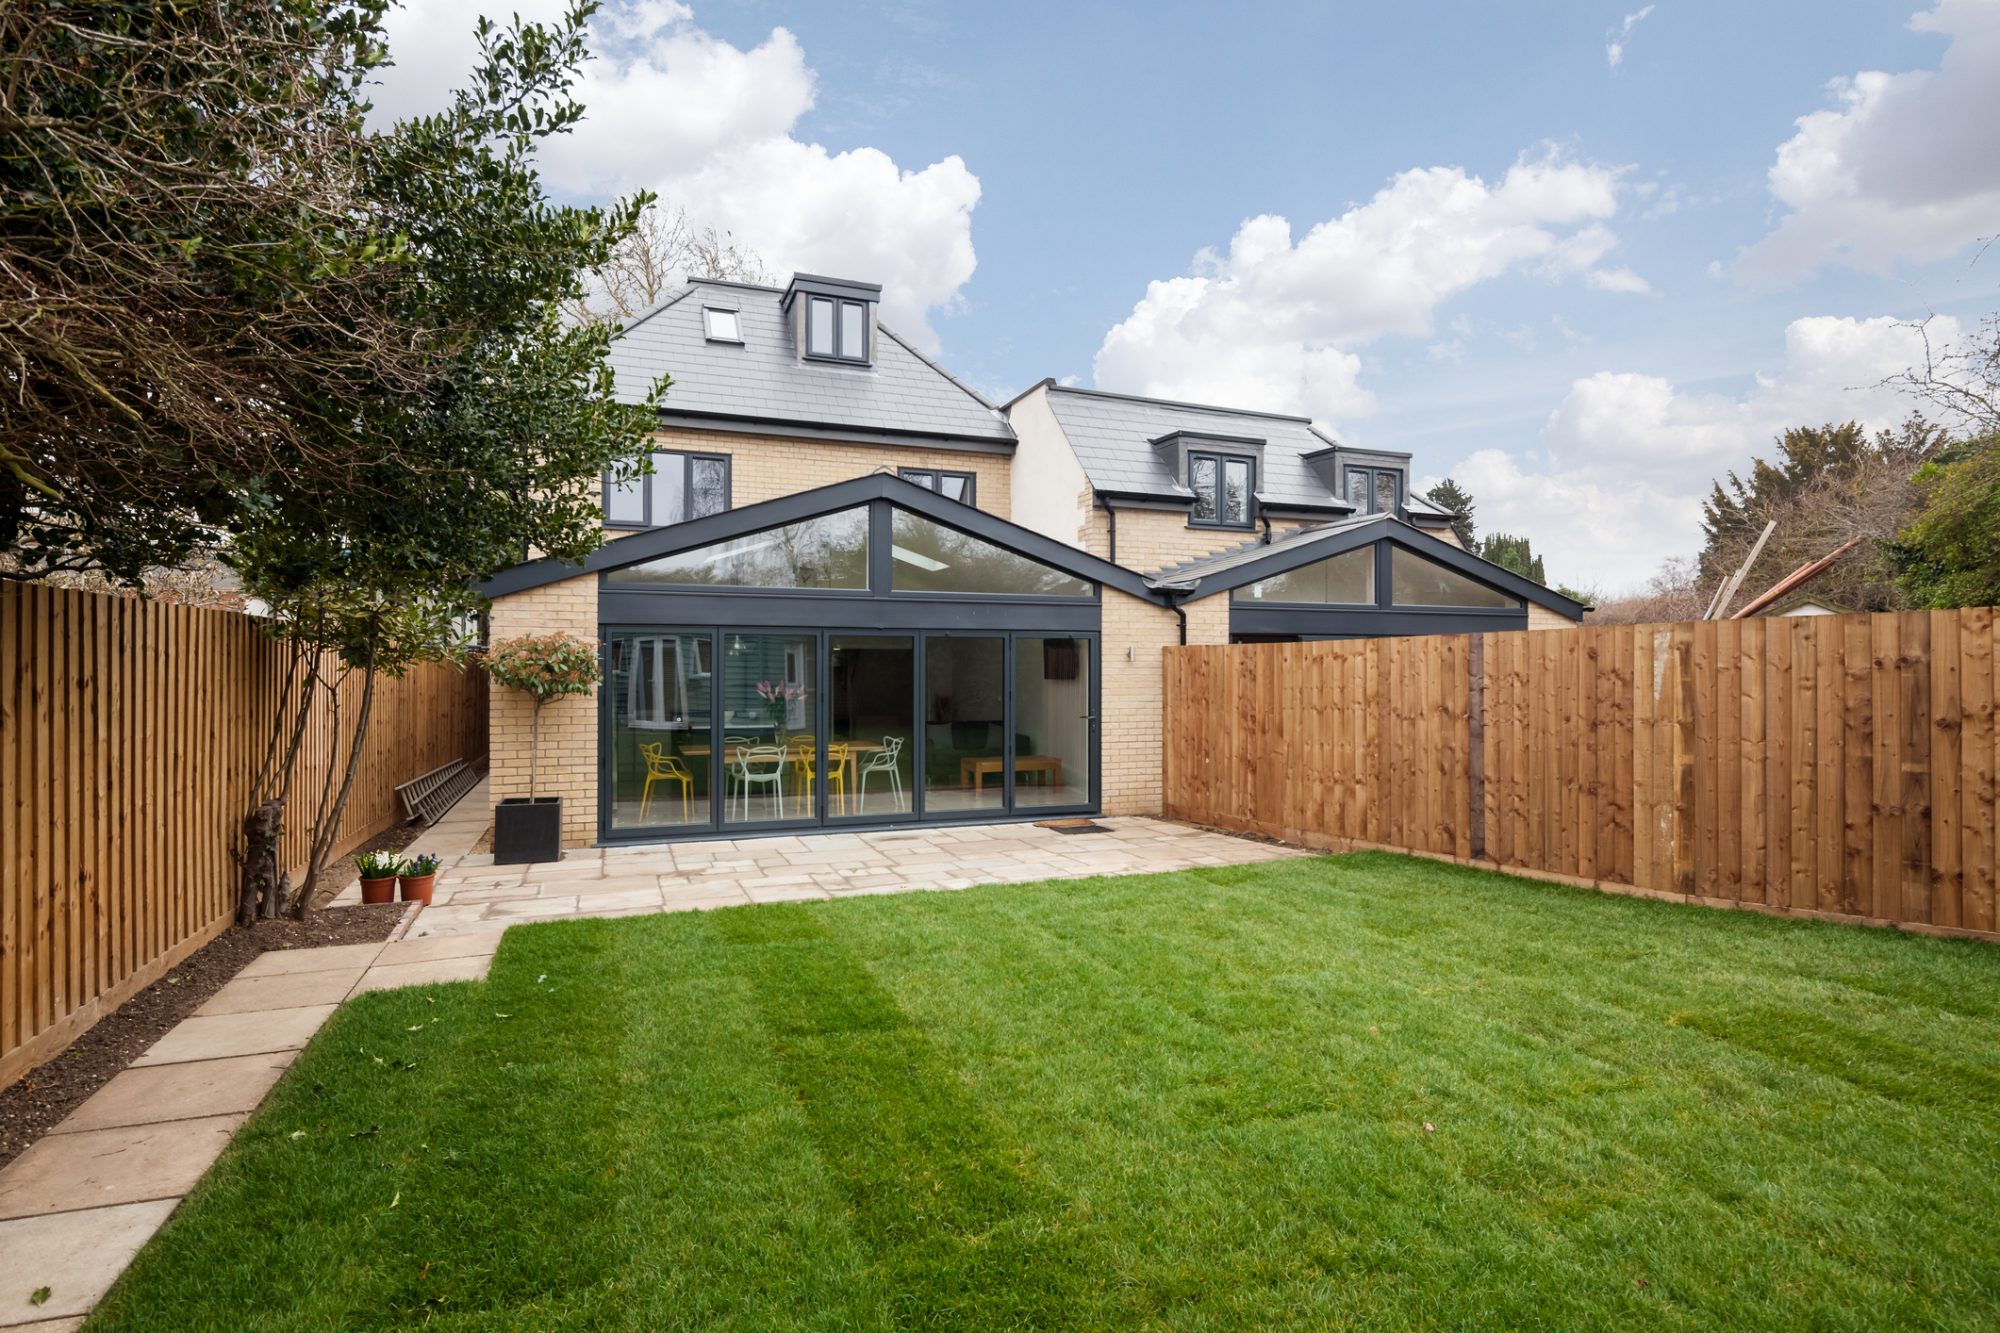 Highworth avenue, Cambridge, England - March 1 2019: Modern contemporary brick three storey suburban city home with Bifold patio doors and simple landscaped garden